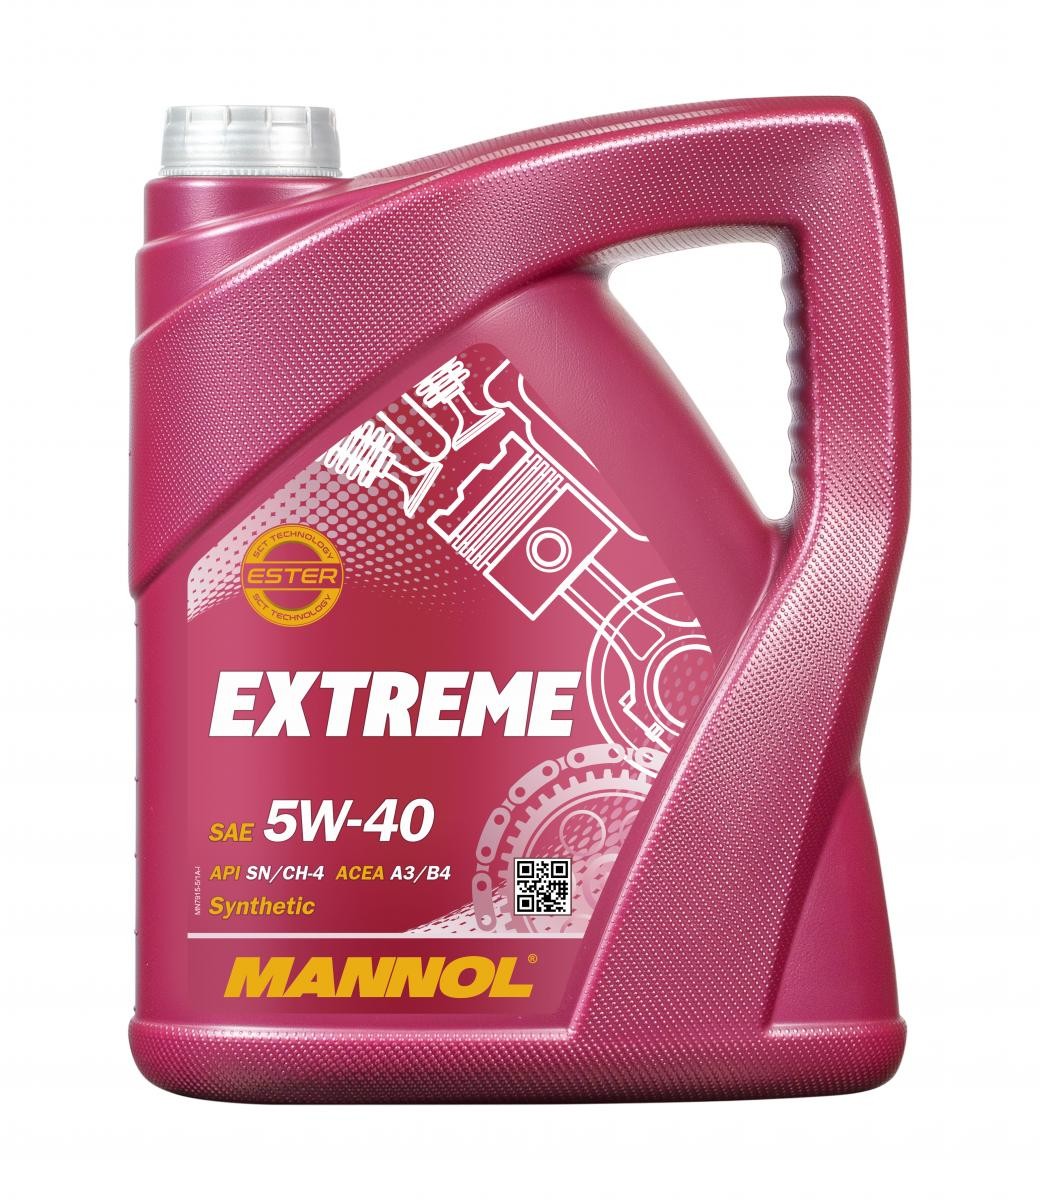 Automobile oil MB 226.5 MANNOL - MN7915-5 EXTREME